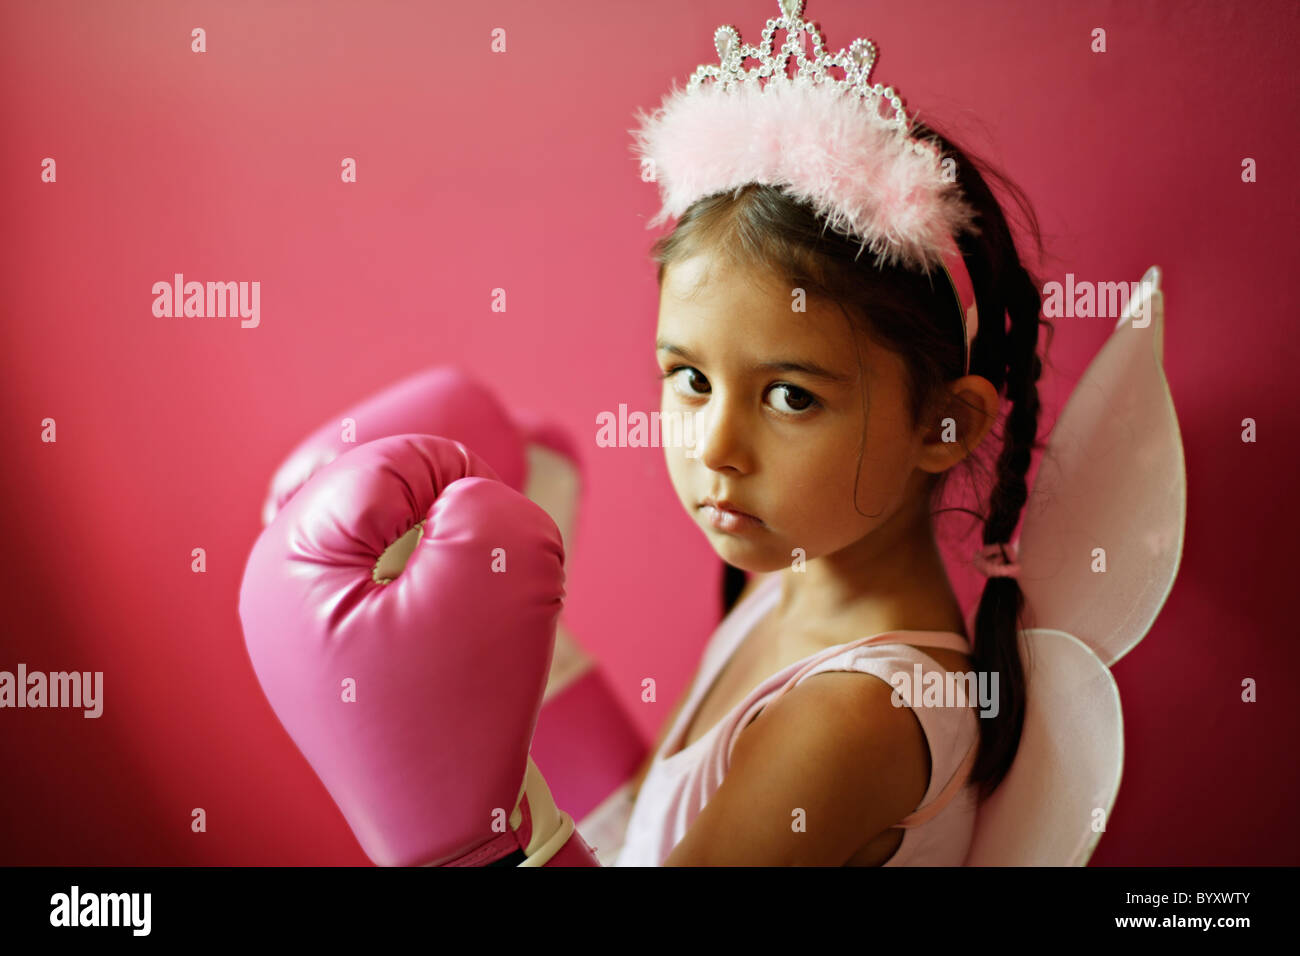 Five year old girl with pink boxing gloves, fairy wings and tiara Stock Photo